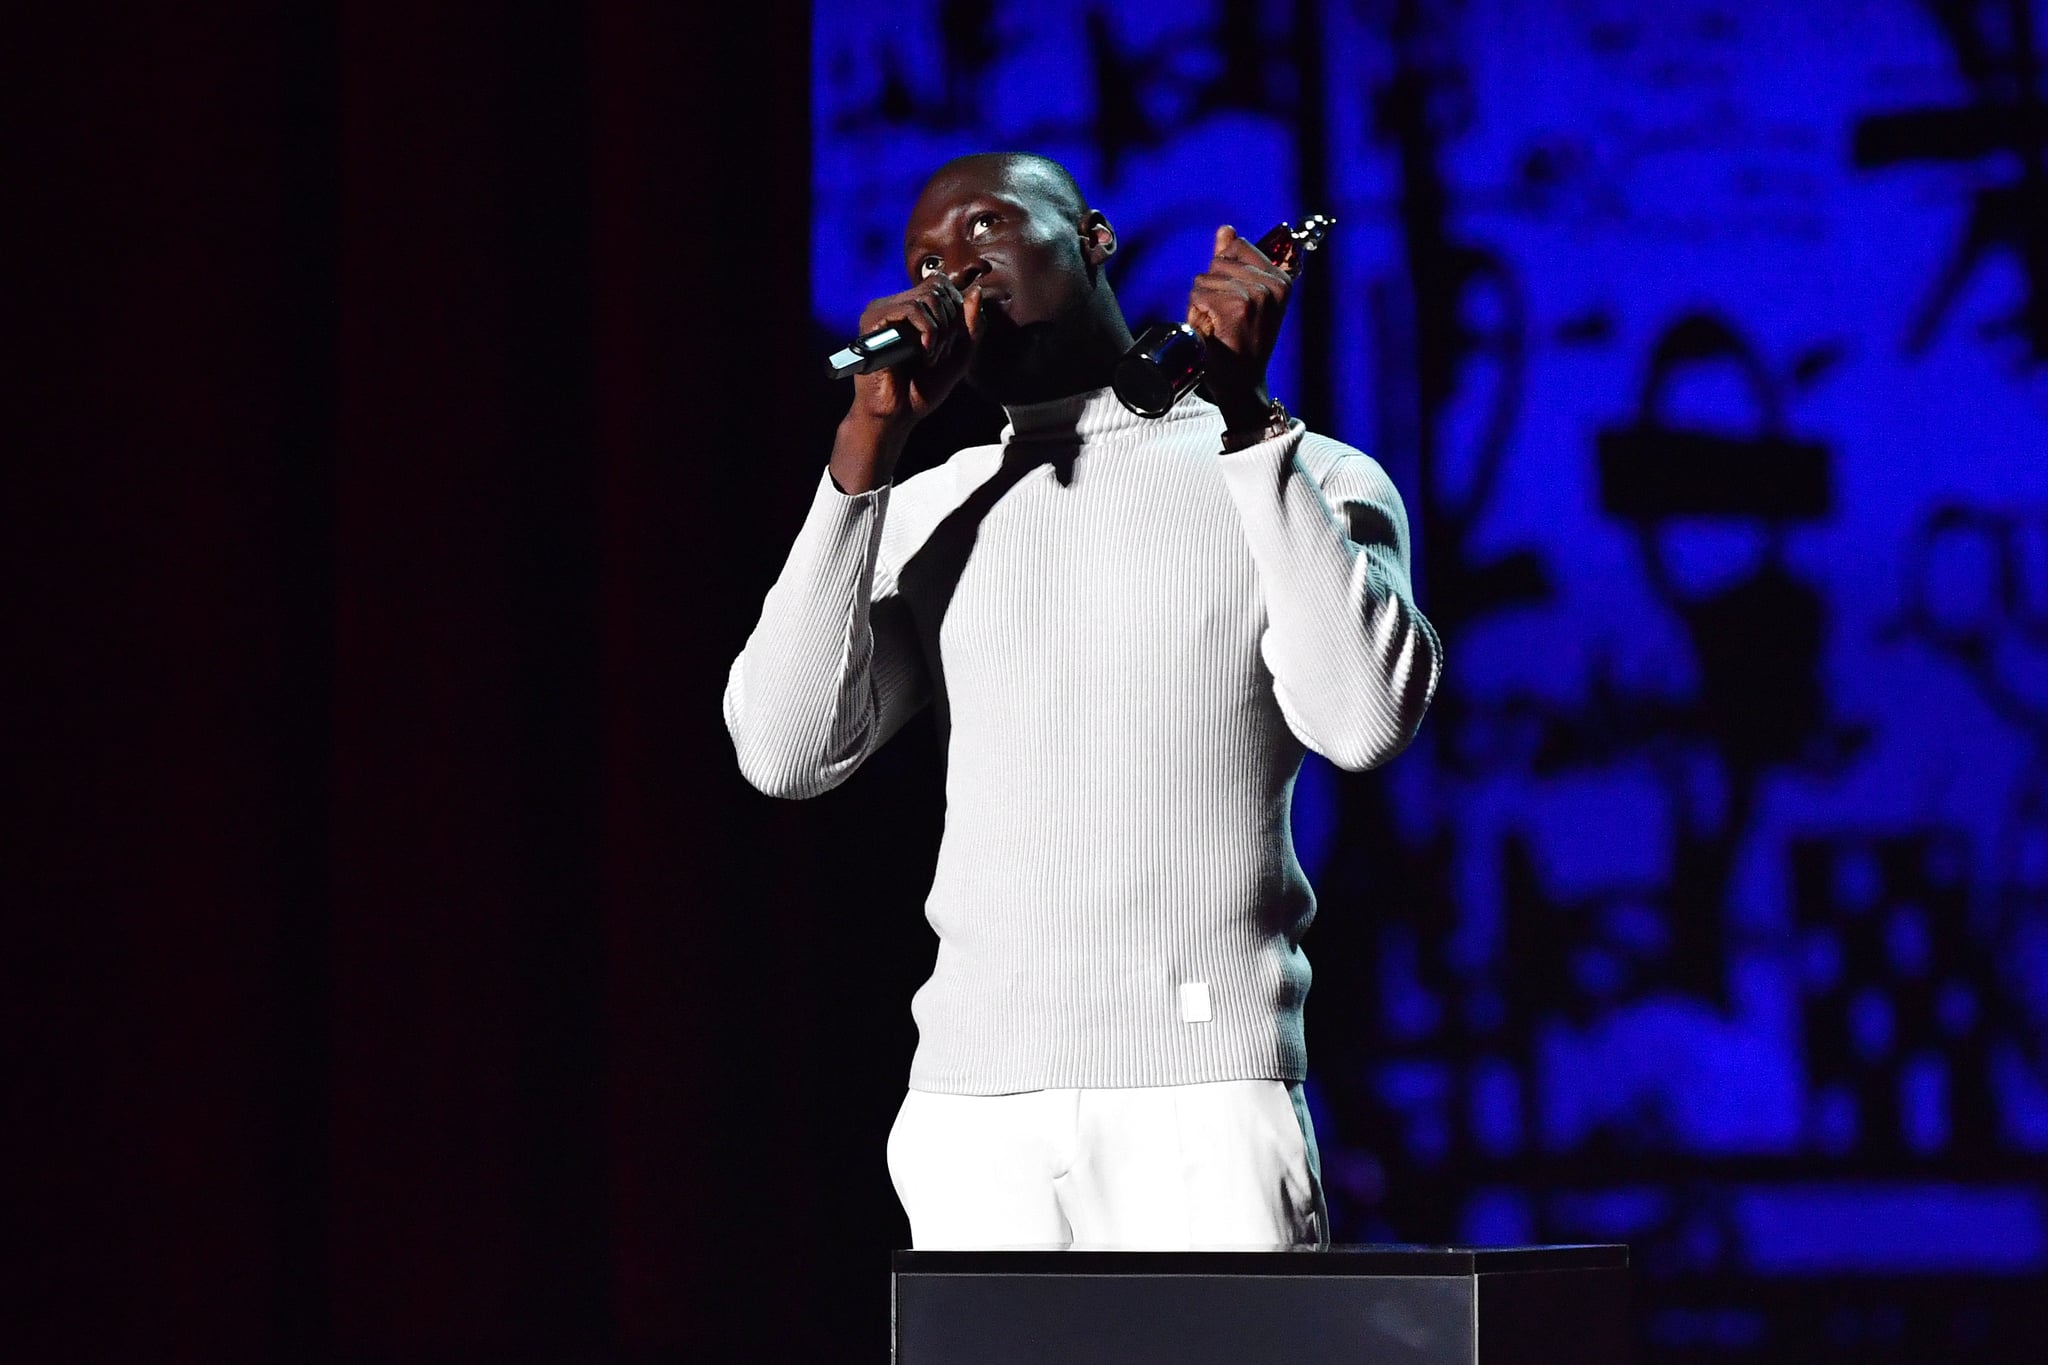 LONDON, ENGLAND - FEBRUARY 18: (EDITORIAL USE ONLY) Stormzy accepts the Best Male Solo Artist award during The BRIT Awards 2020 at The O2 Arena on February 18, 2020 in London, England. (Photo by Gareth Cattermole/Getty Images)